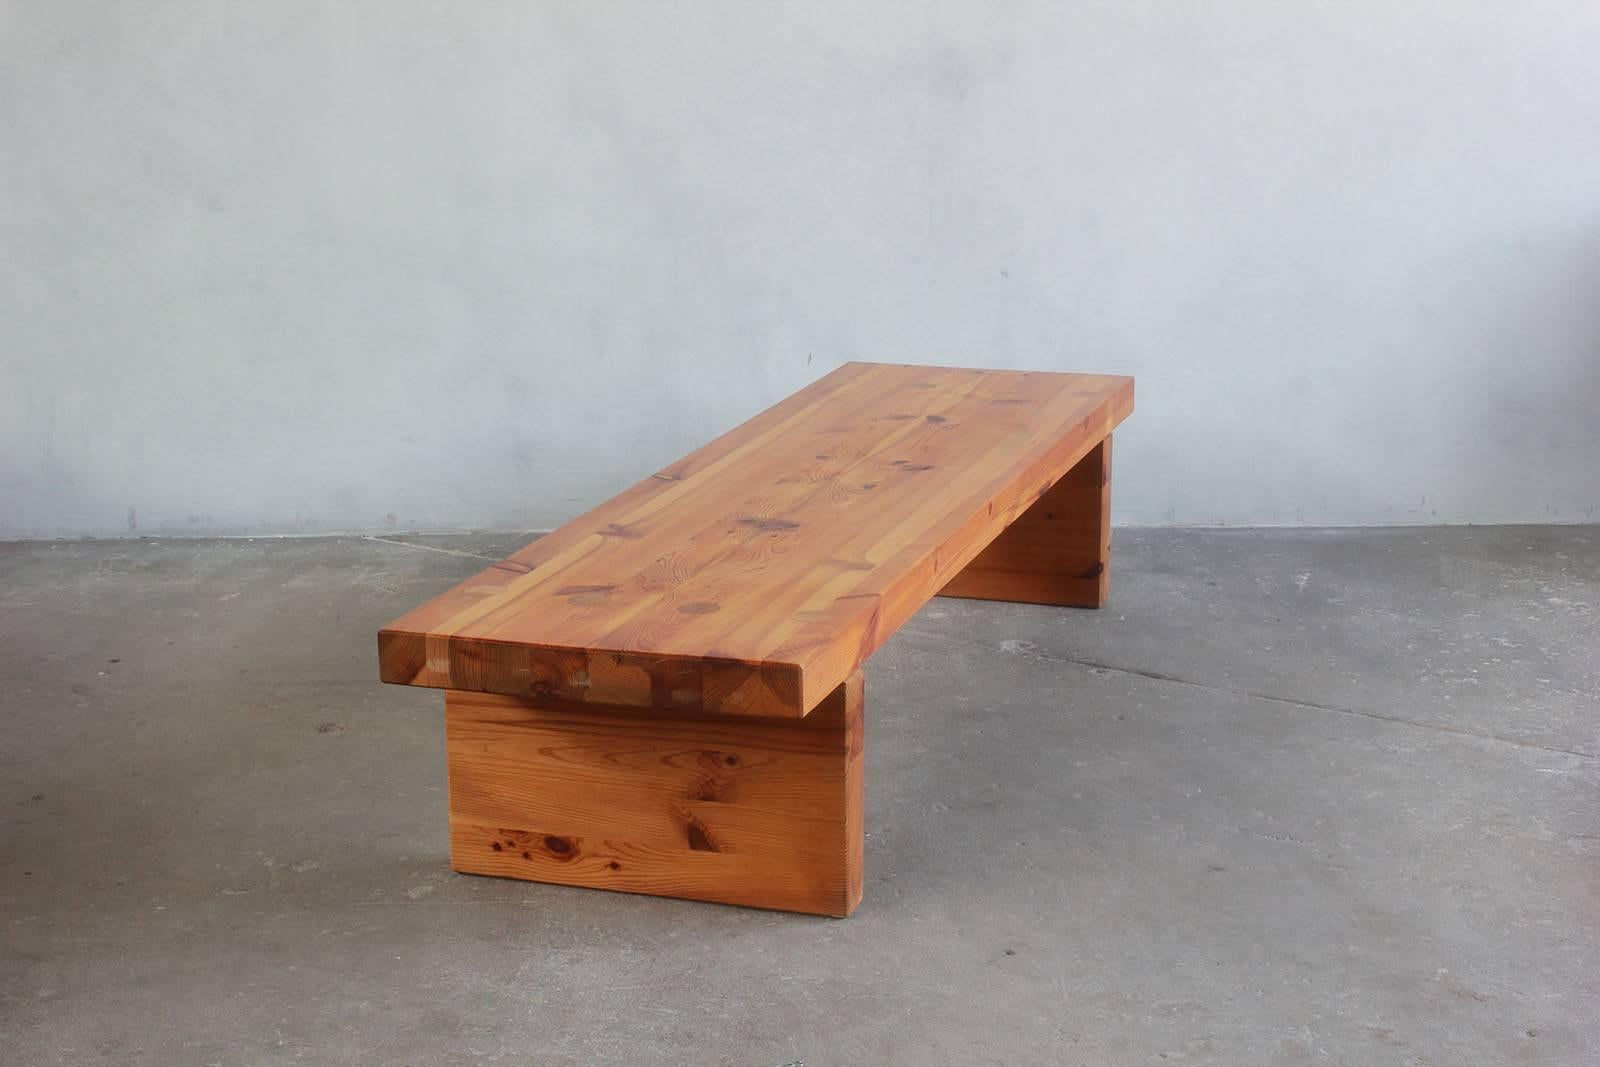 Low and long pine table or bench with simple constructed details.